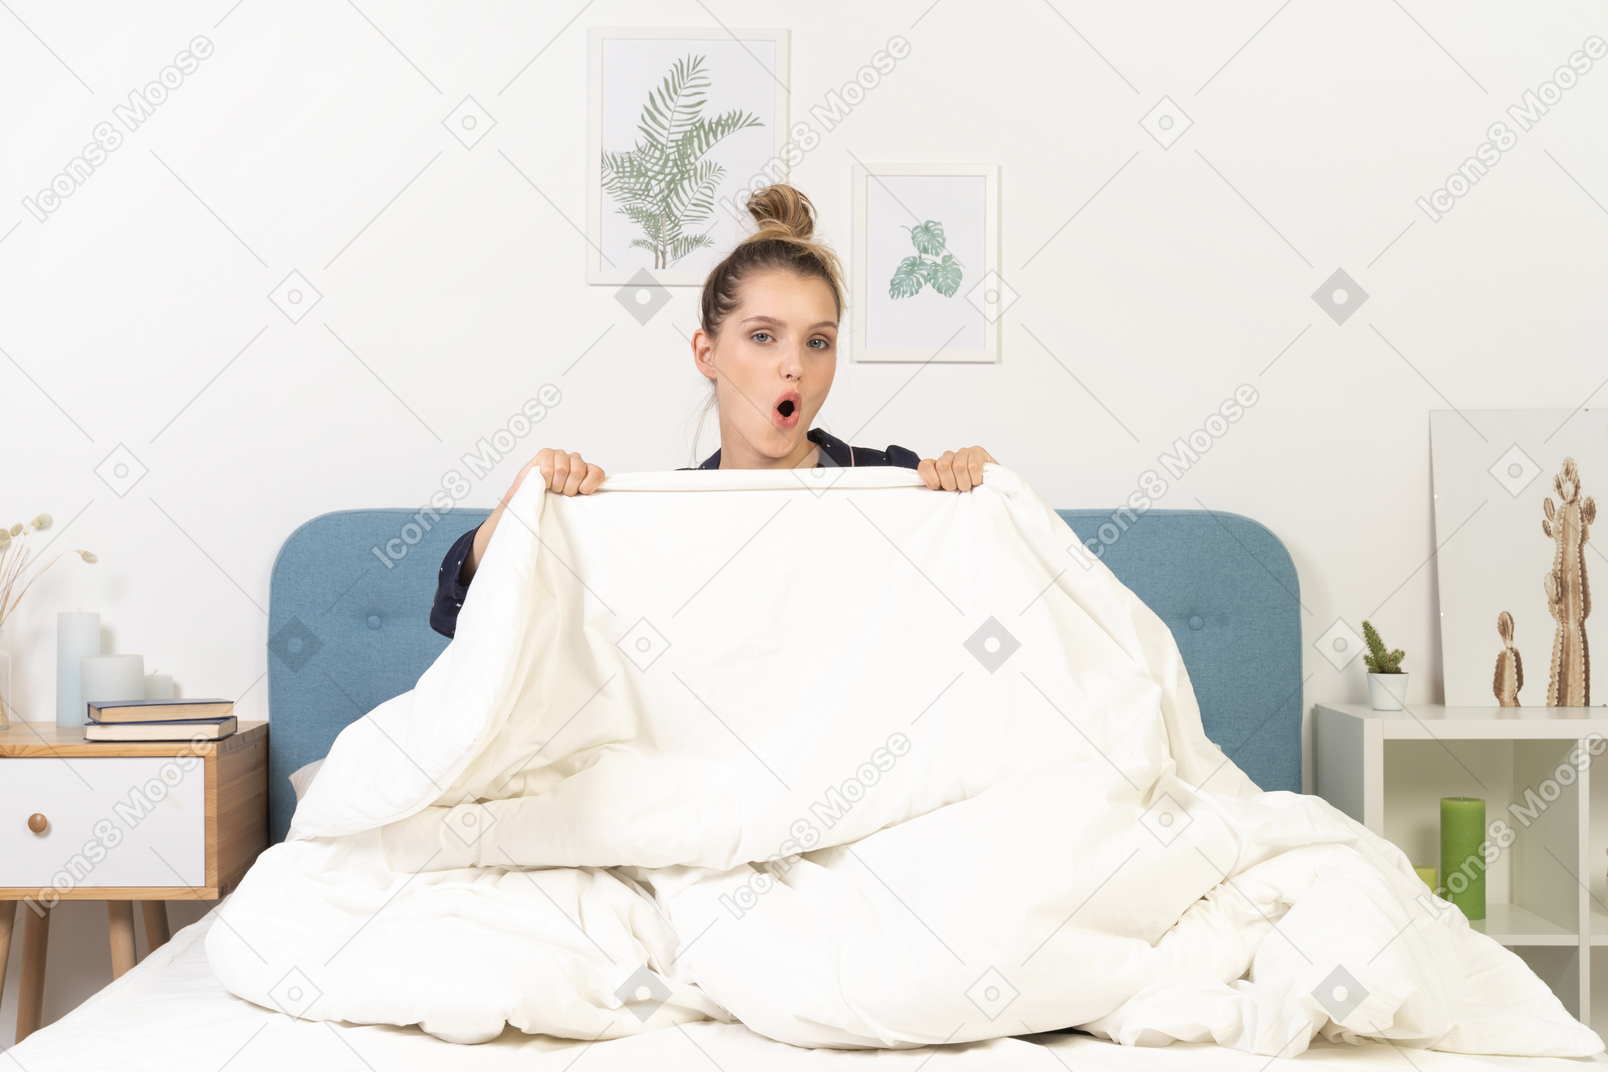 Front view of a surprised young woman in pajamas hiding behind the blanket staying in bed